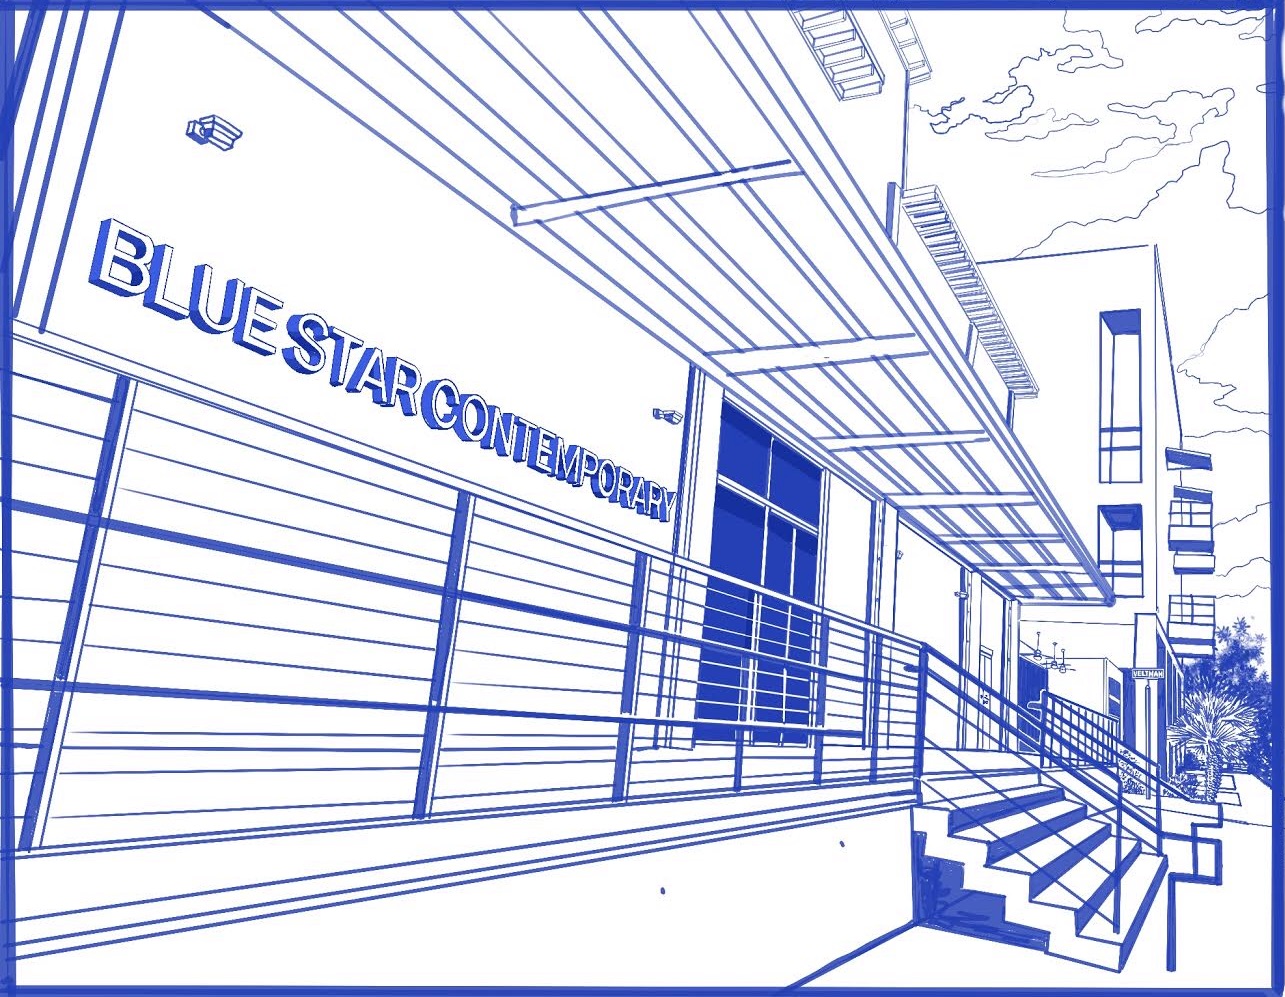 Blue Star Coloring Book, Facade of Blue Star Contemporary at 116 Blue Star